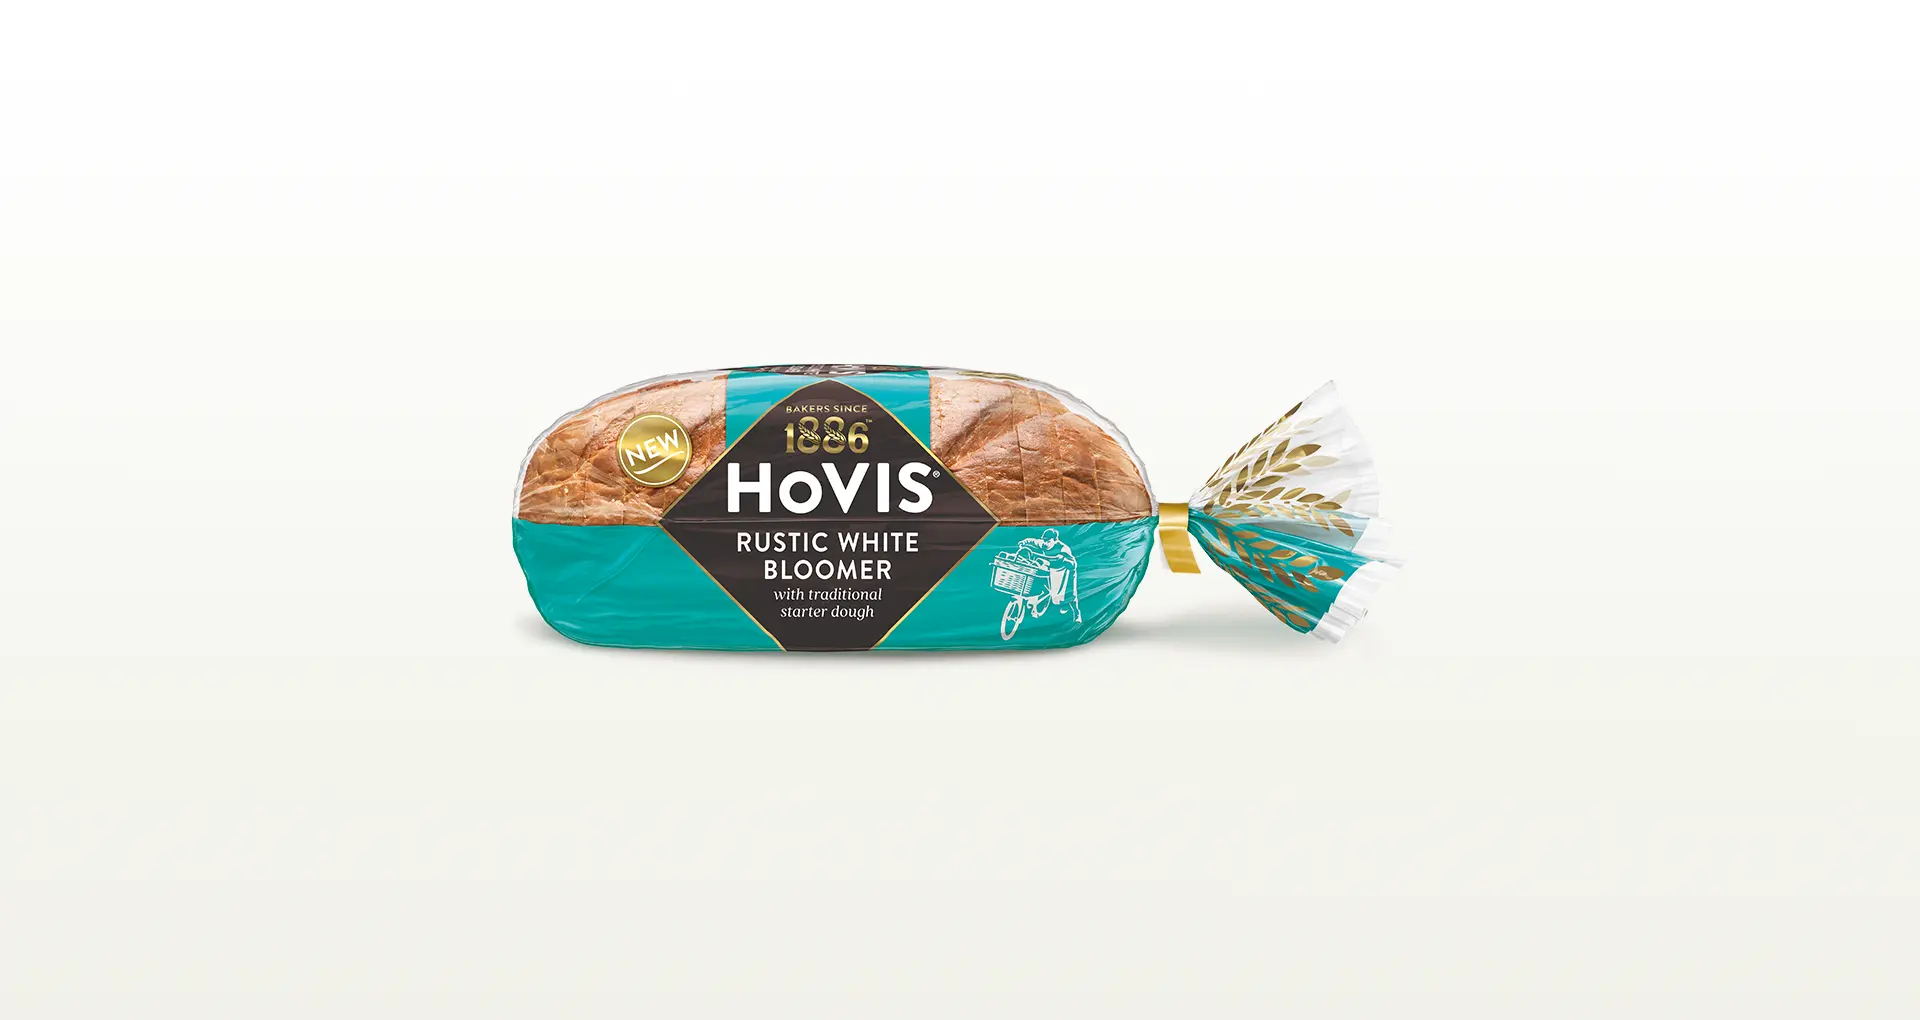 Hovis Rustic White Bloomer